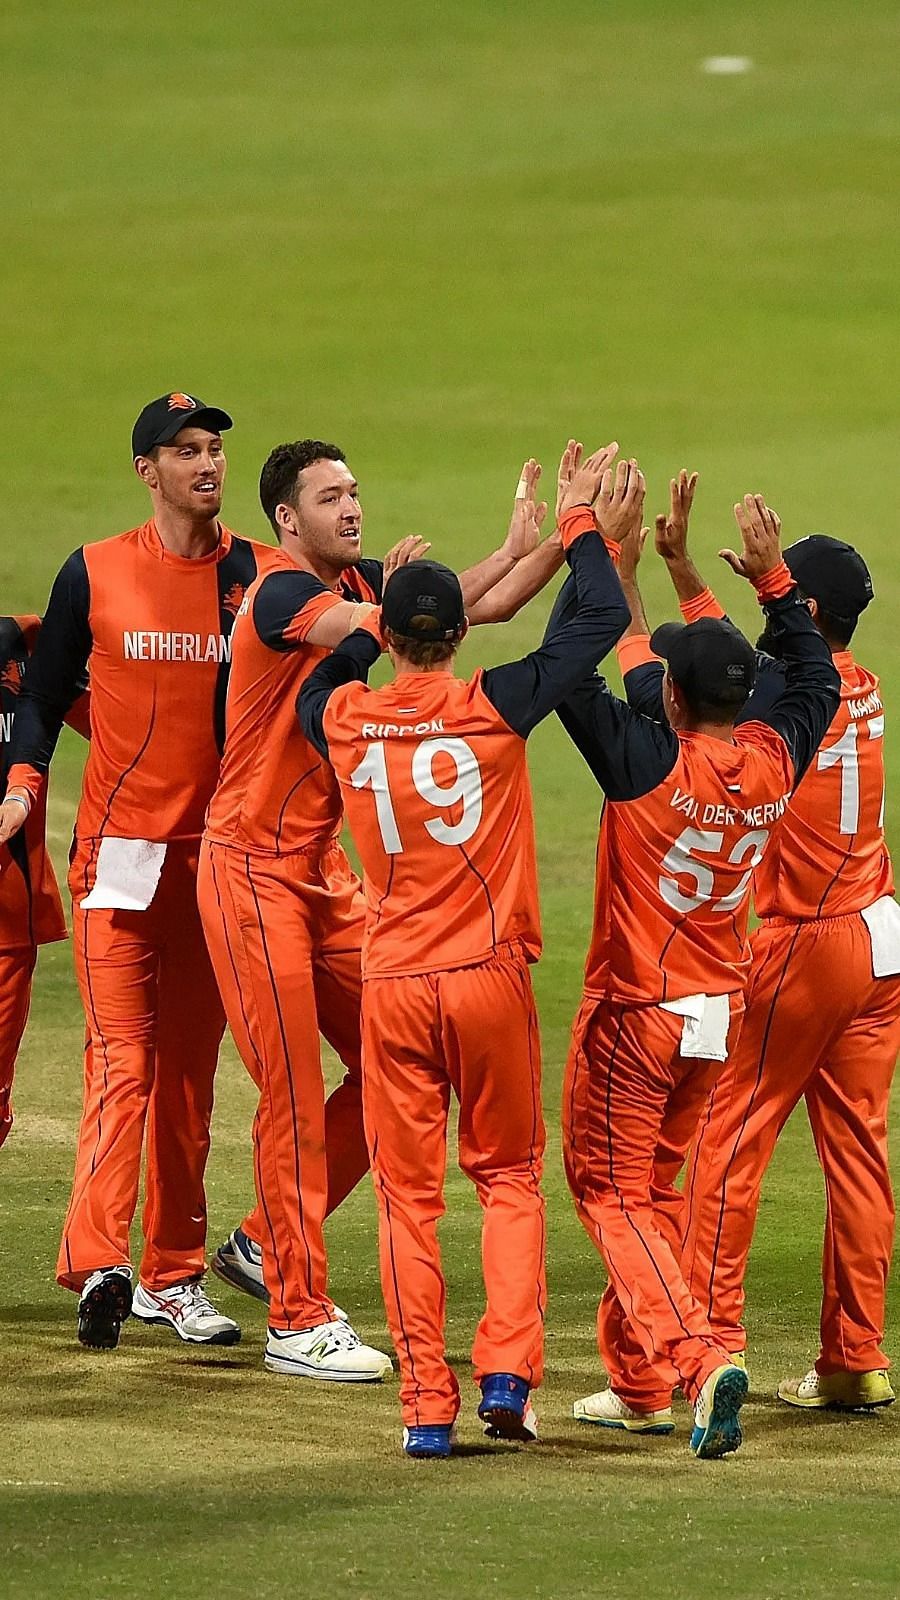 Ned V Sco 2021 Telecast Channel And Live Streaming When And Where To Watch Netherlands Vs Scotland Odi Series